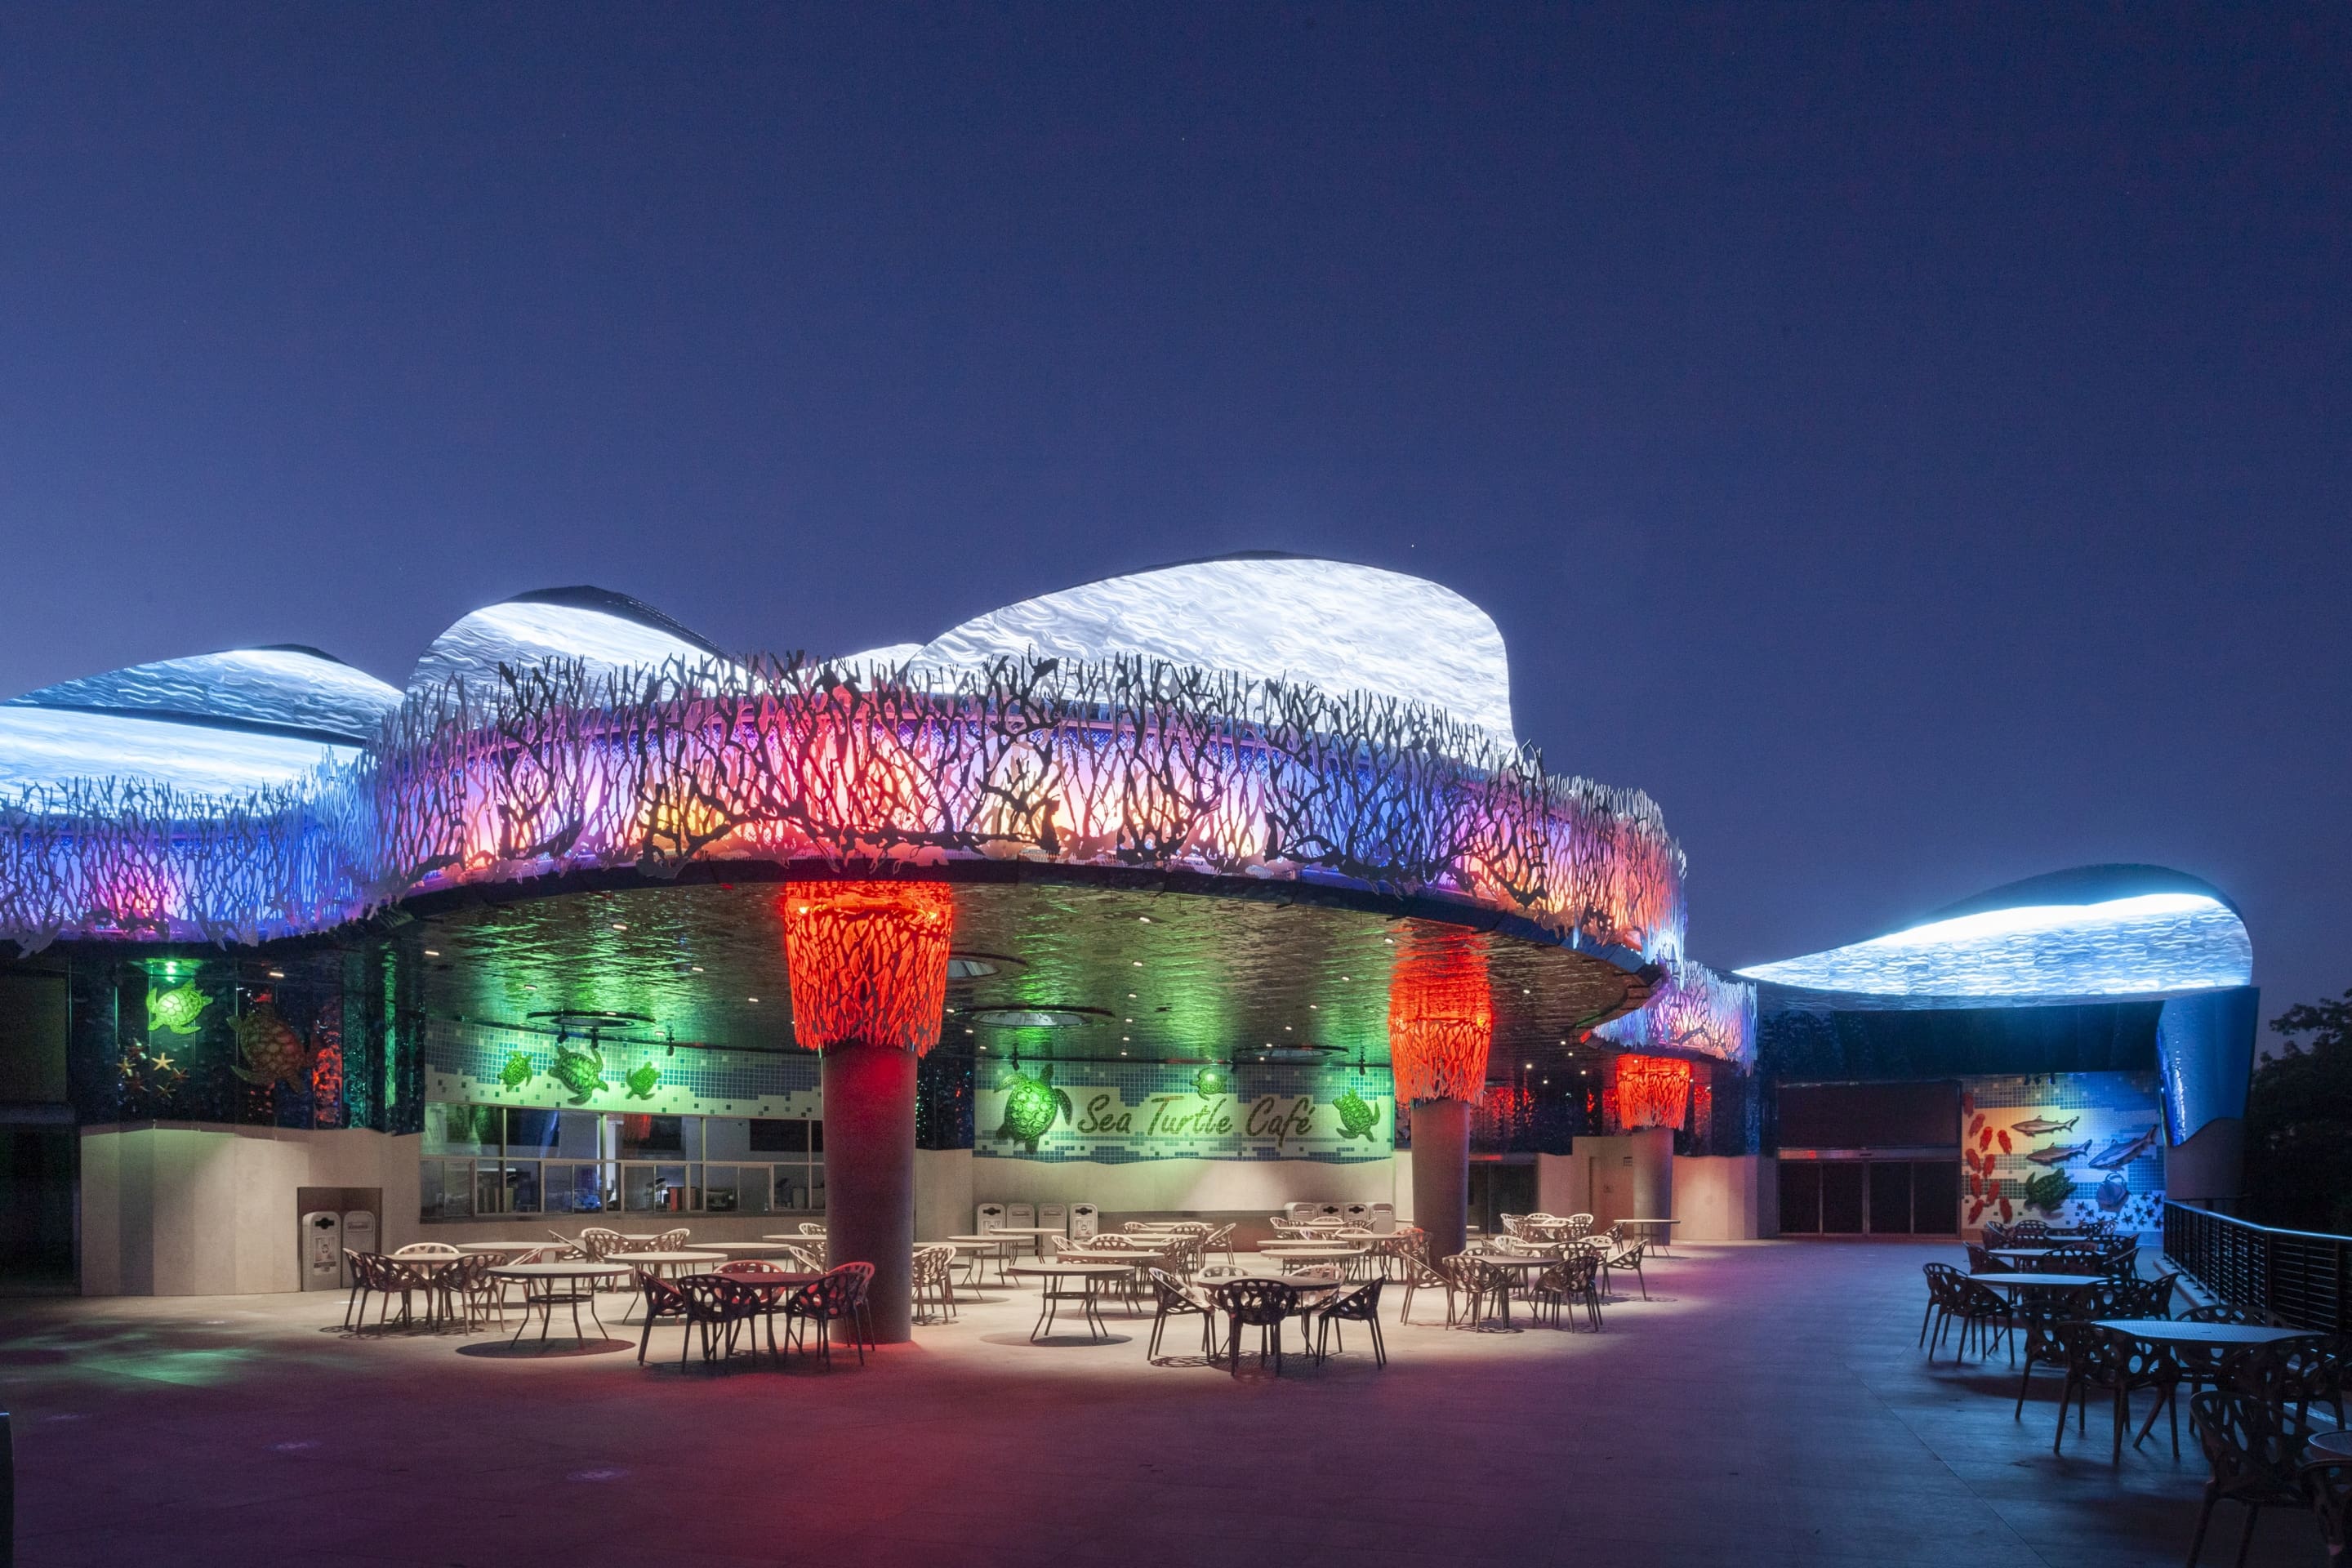 Various multi-color lighting systems were incorporated into the design to emphasize the aquatic theme at night.